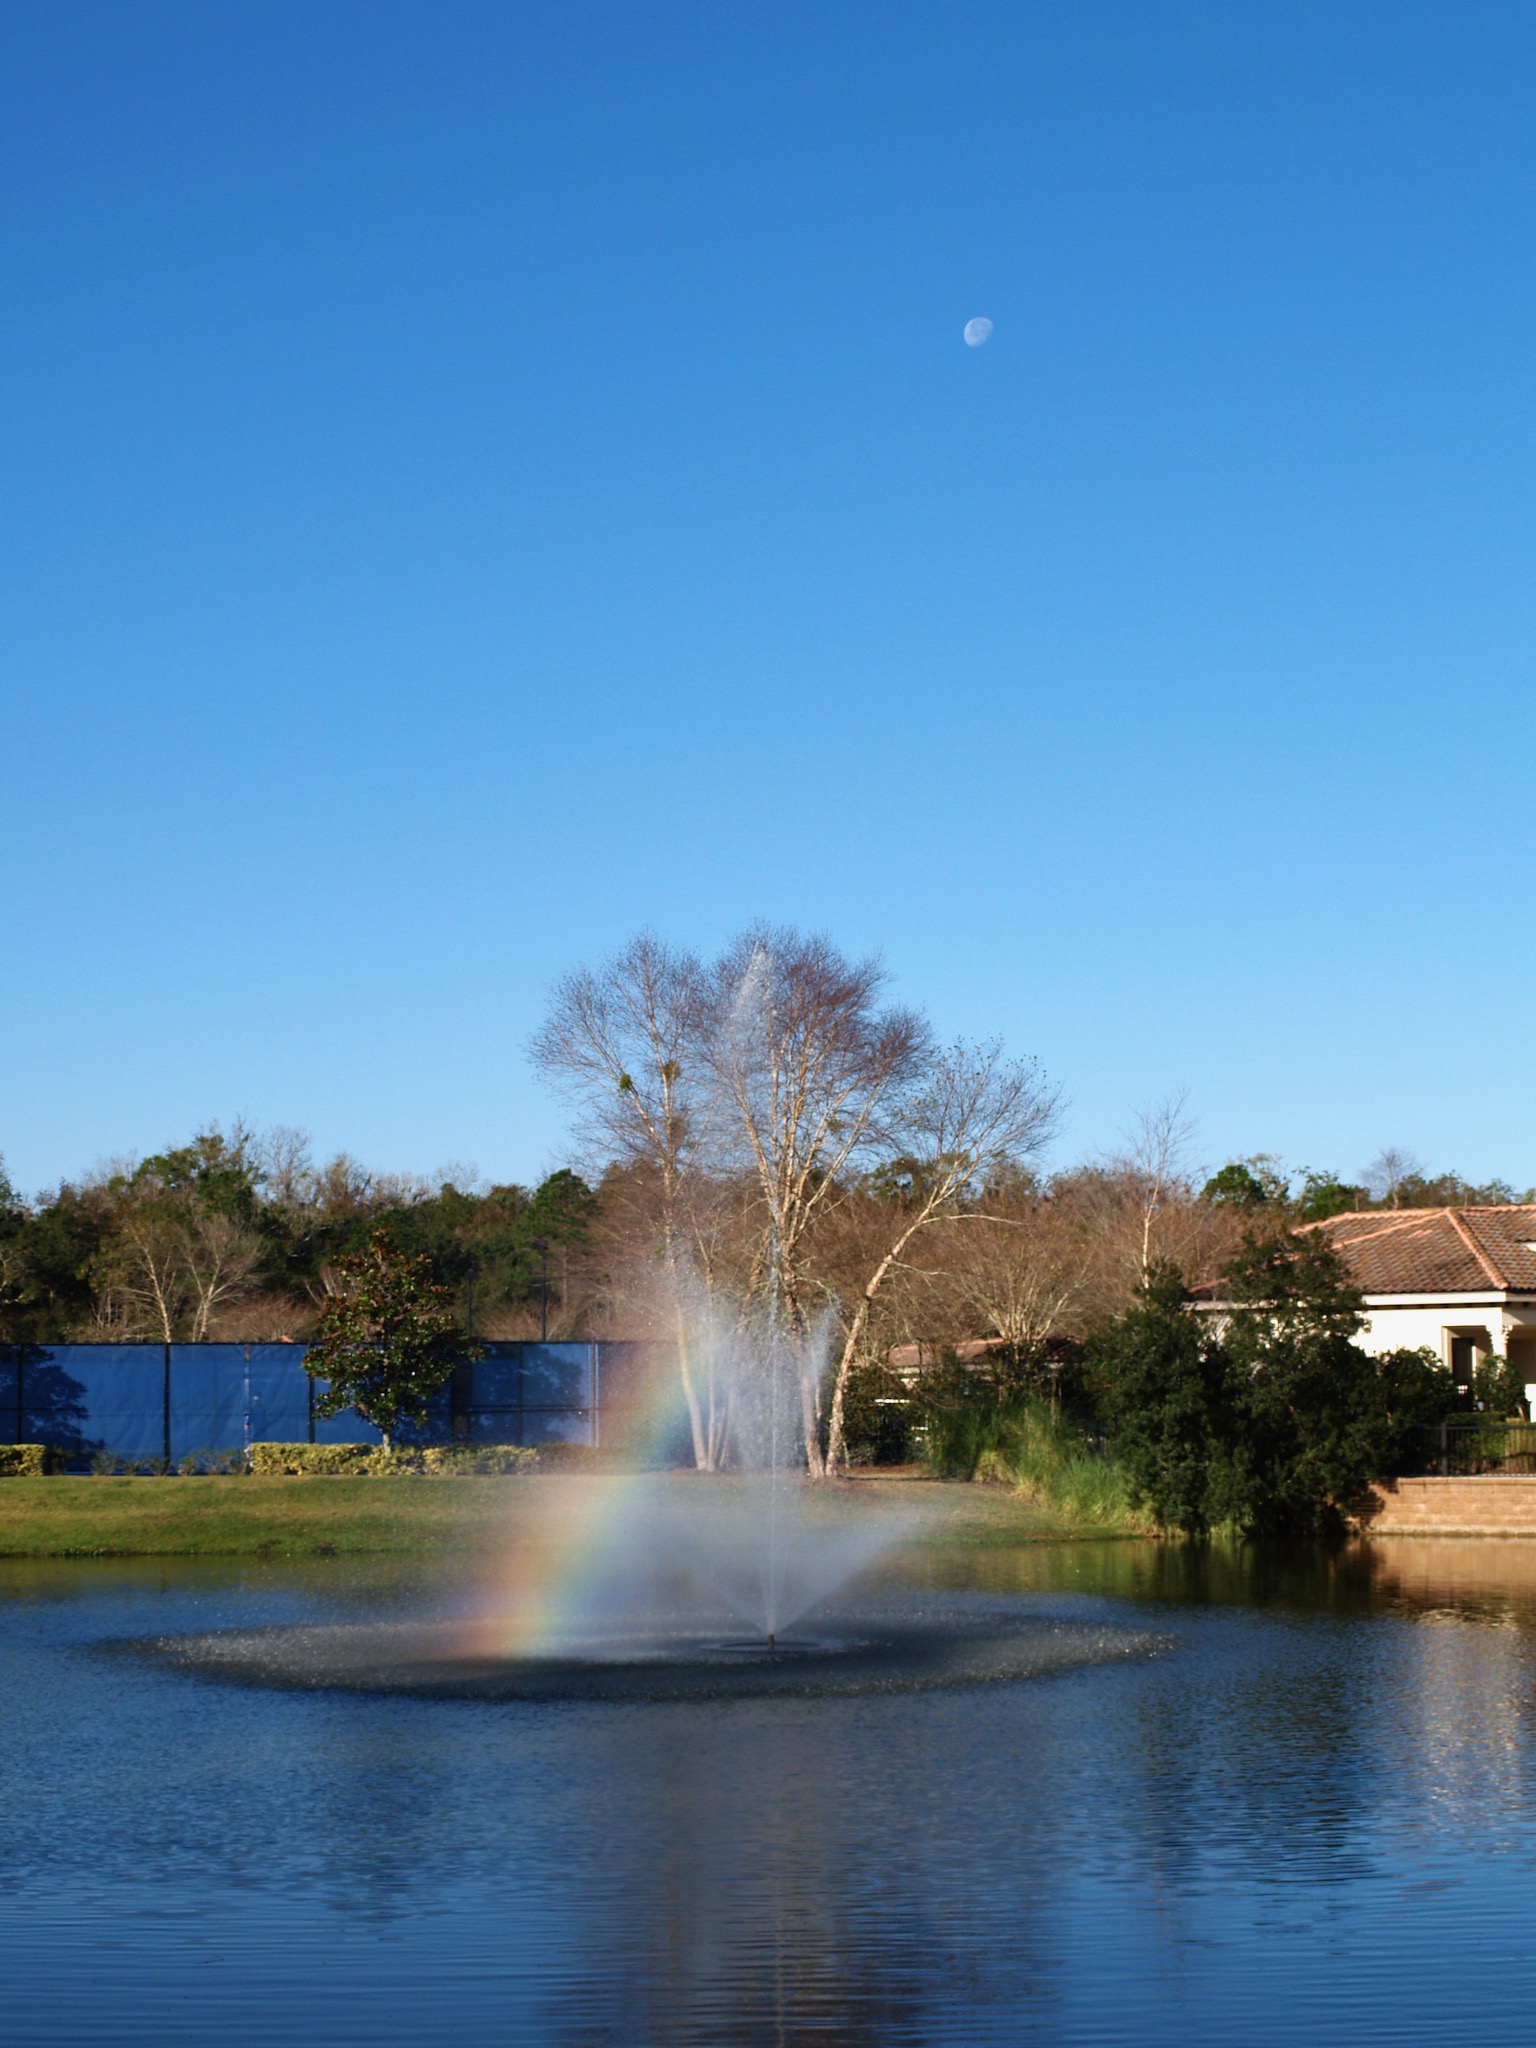 Color photo of a rainbow appearing in a fountain spray in a retention pond with the moon overhead.